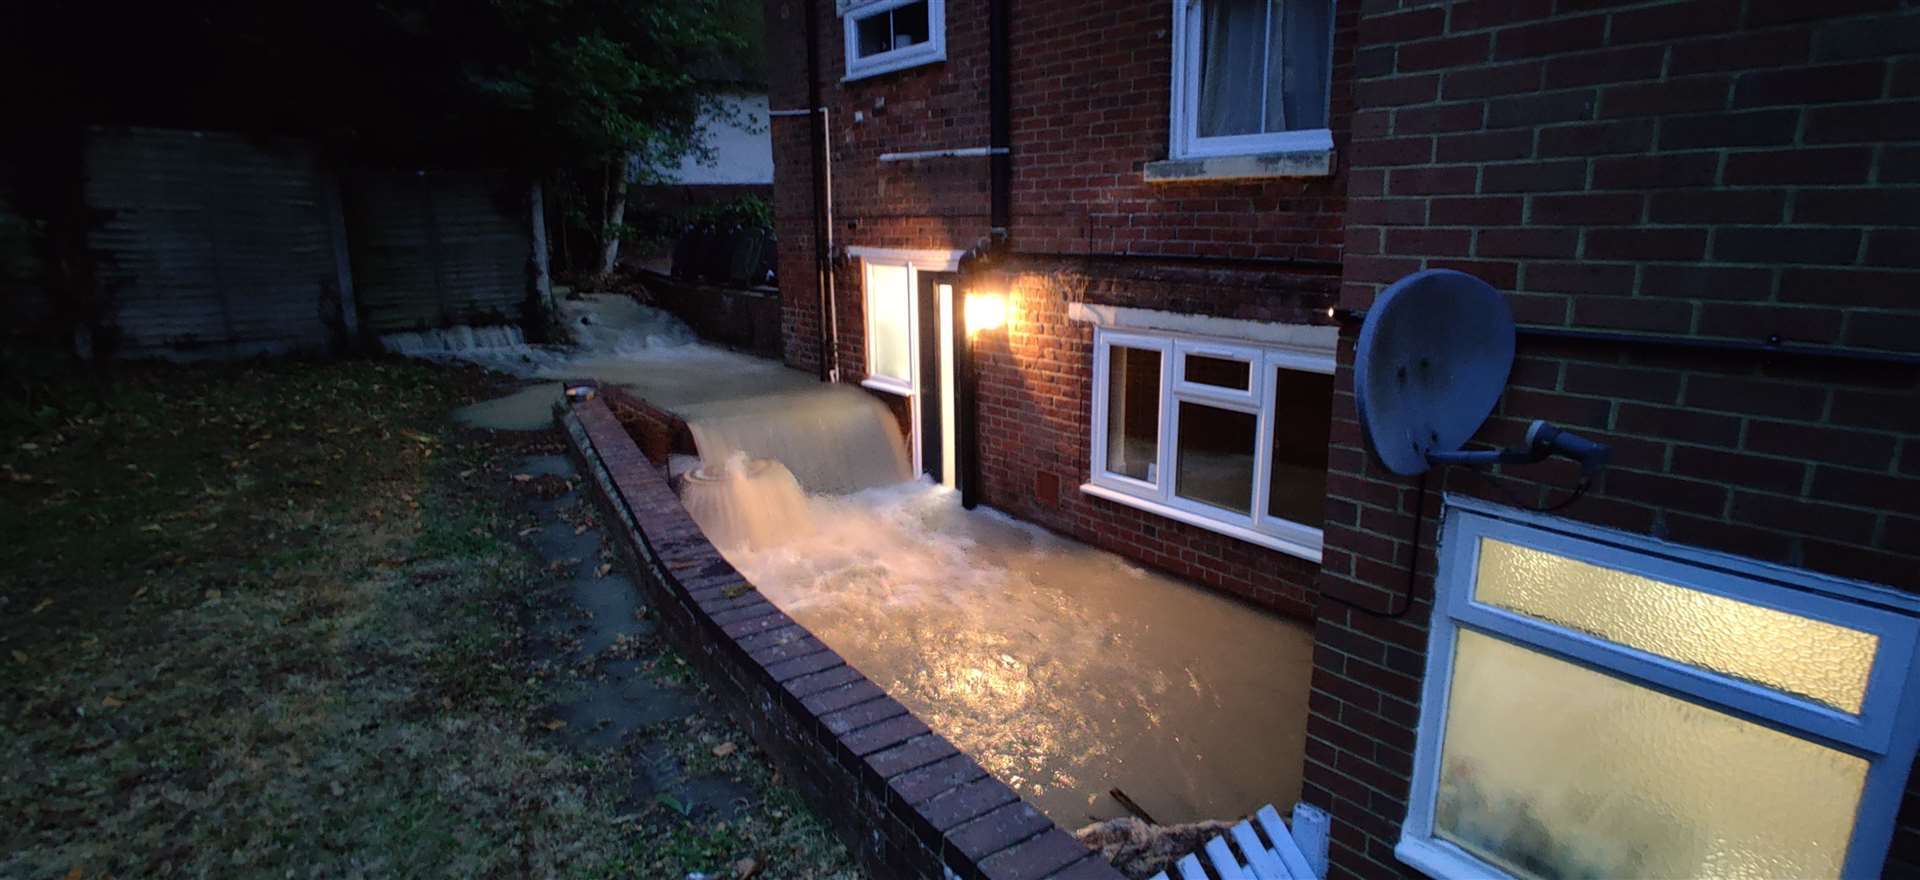 Residents heard the water running down the hill at 4.30am